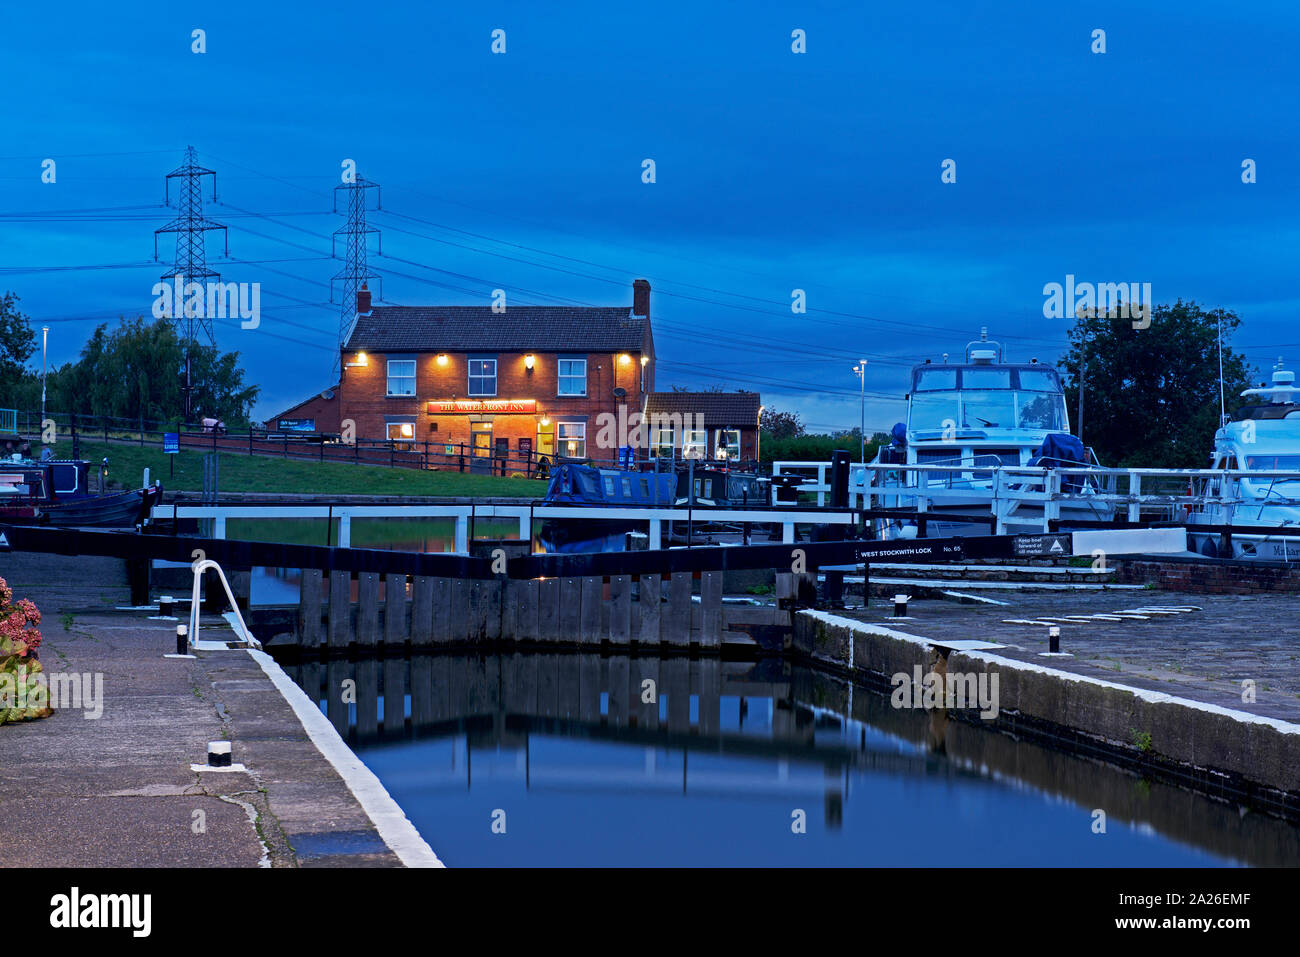 The Waterfront Inn, overlooking the canal basin at West Stockwith, North Lincolnshire, England UK Stock Photo